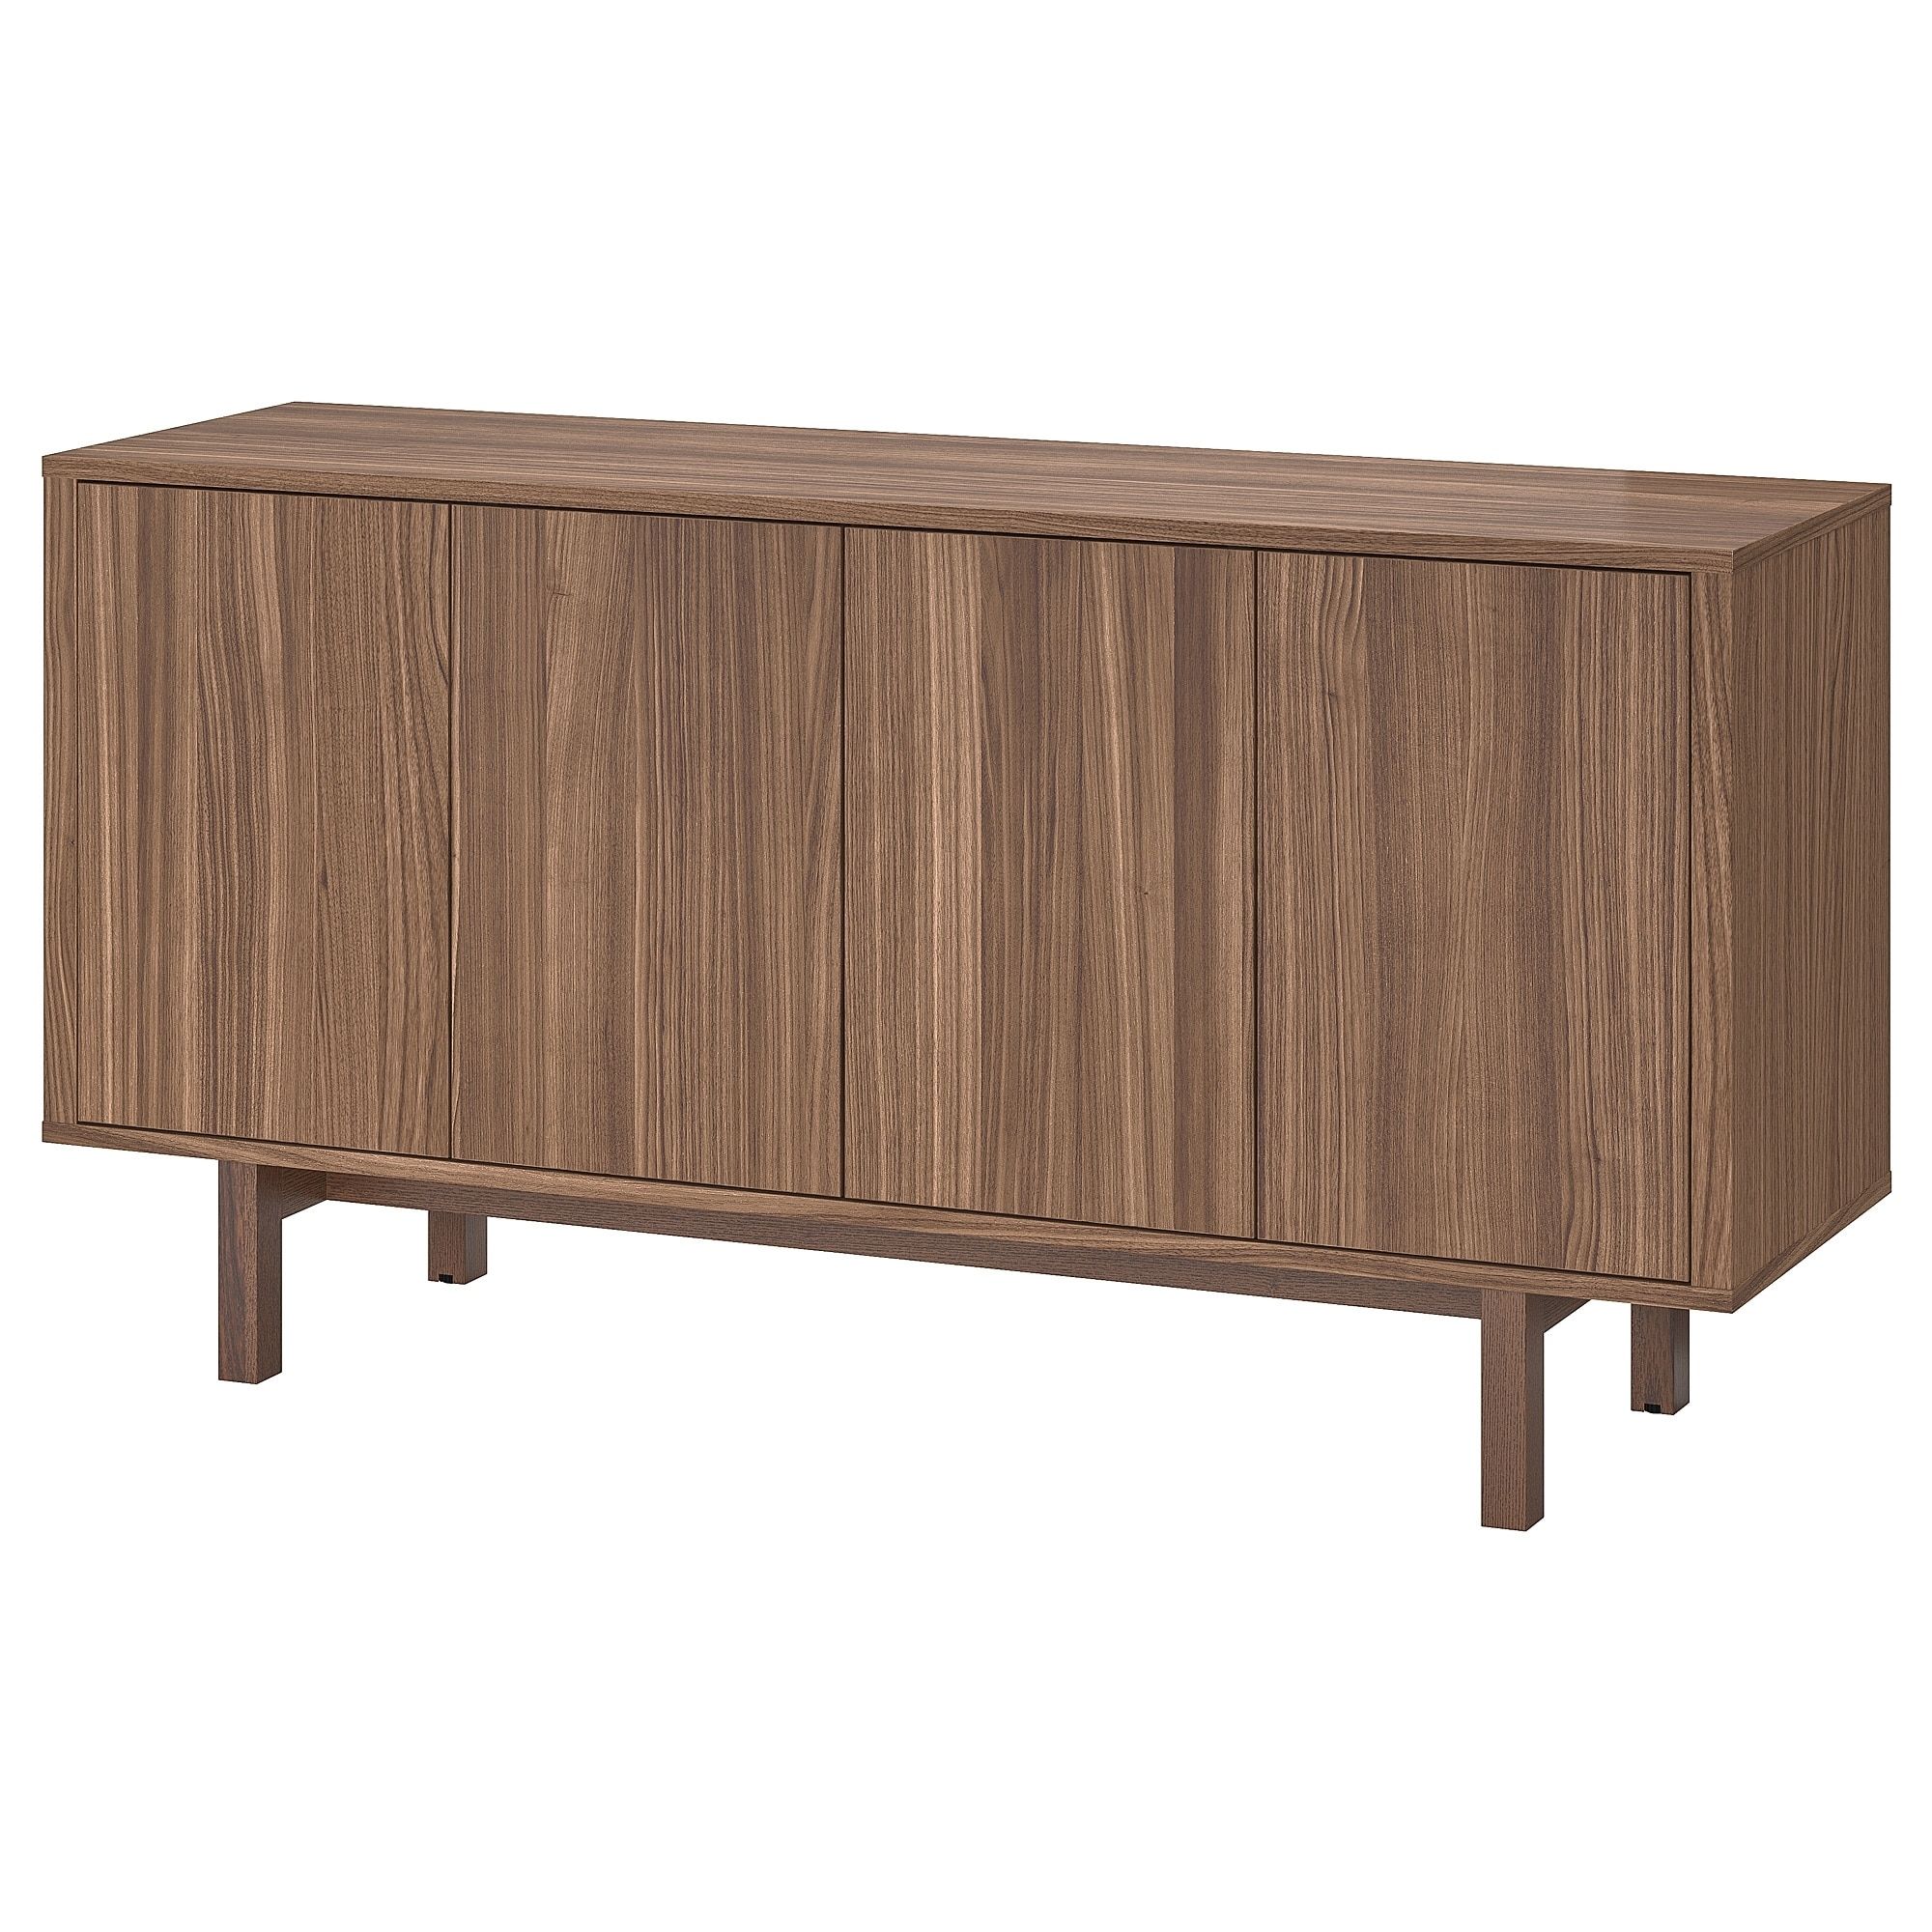 Sideboards & Buffet Cabinets | Ikea Throughout Brown Chevron 4 Door Sideboards (View 18 of 30)